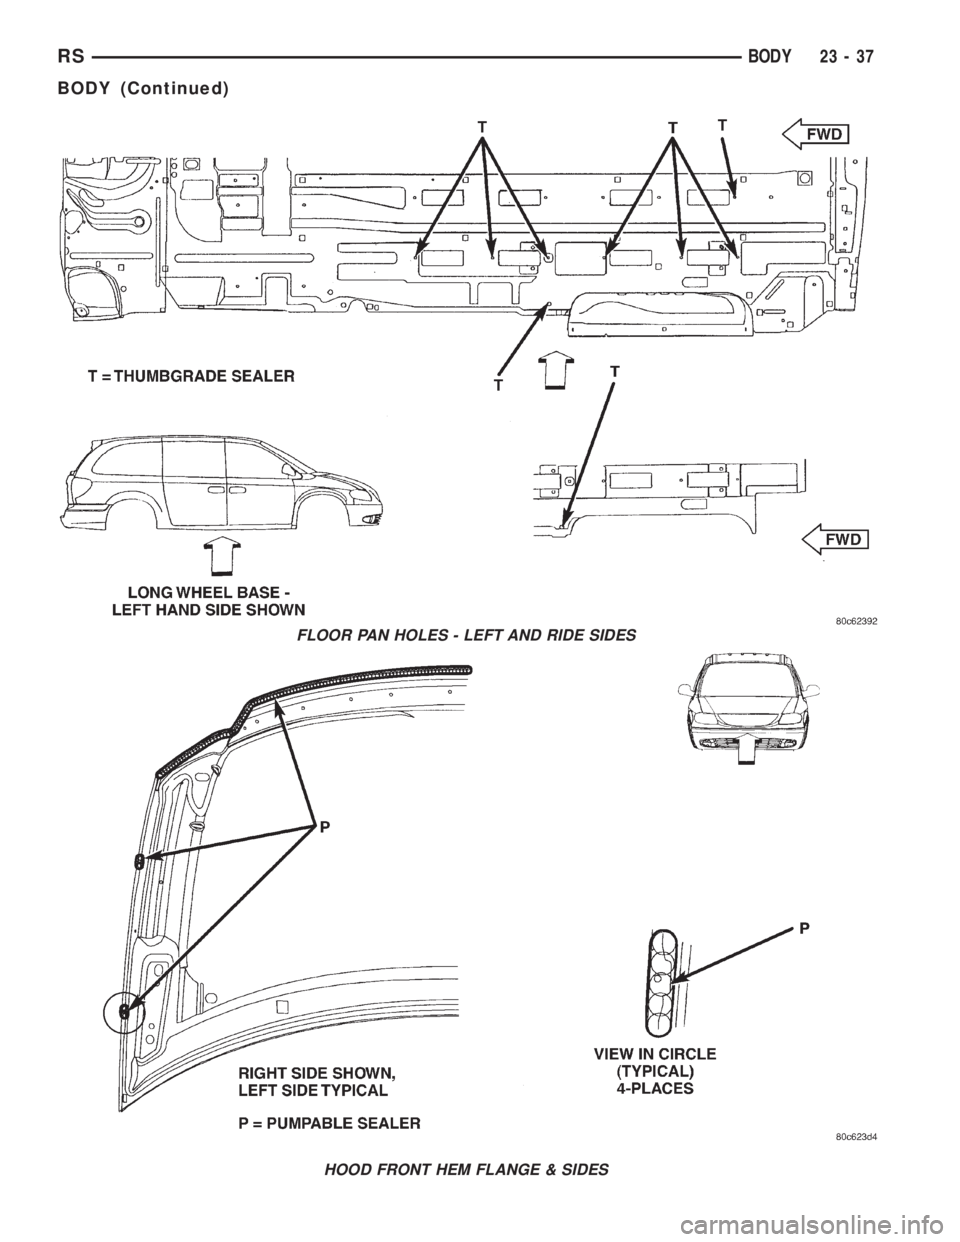 CHRYSLER VOYAGER 2001  Service Manual FLOOR PAN HOLES - LEFT AND RIDE SIDES
HOOD FRONT HEM FLANGE & SIDES
RSBODY23-37
BODY (Continued) 